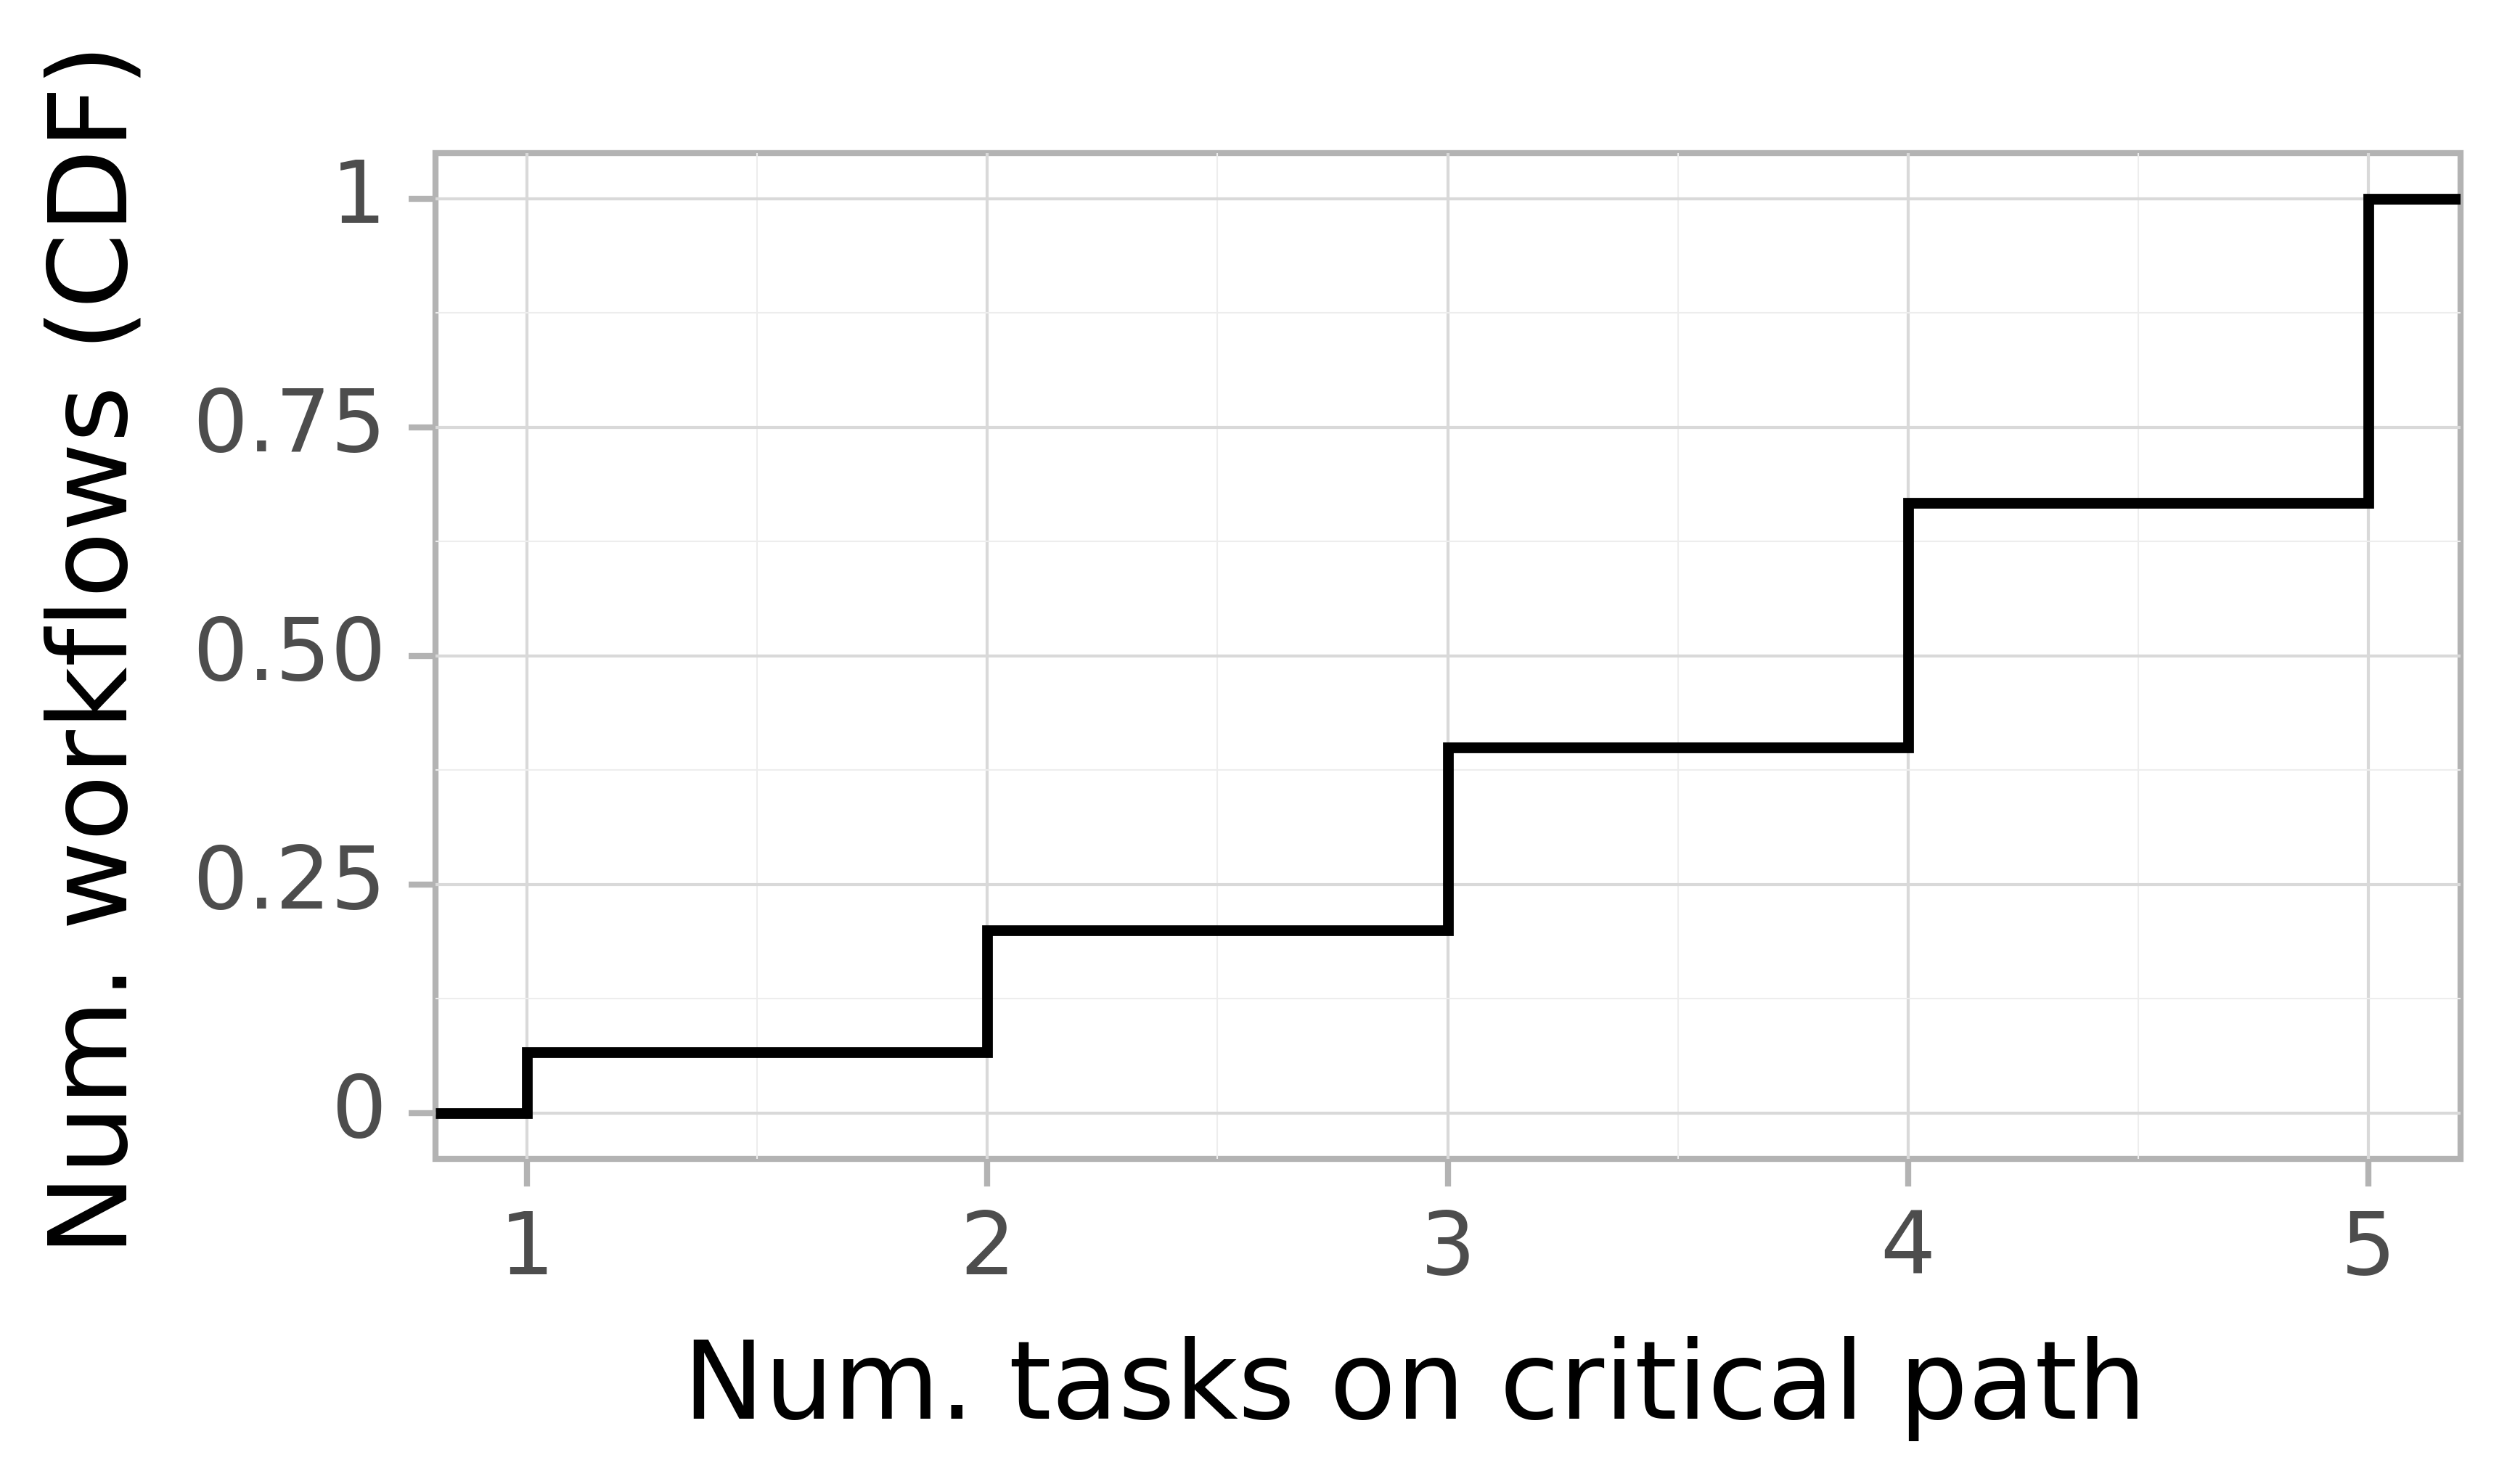 Job critical path task count graph for the askalon_ee2 trace.